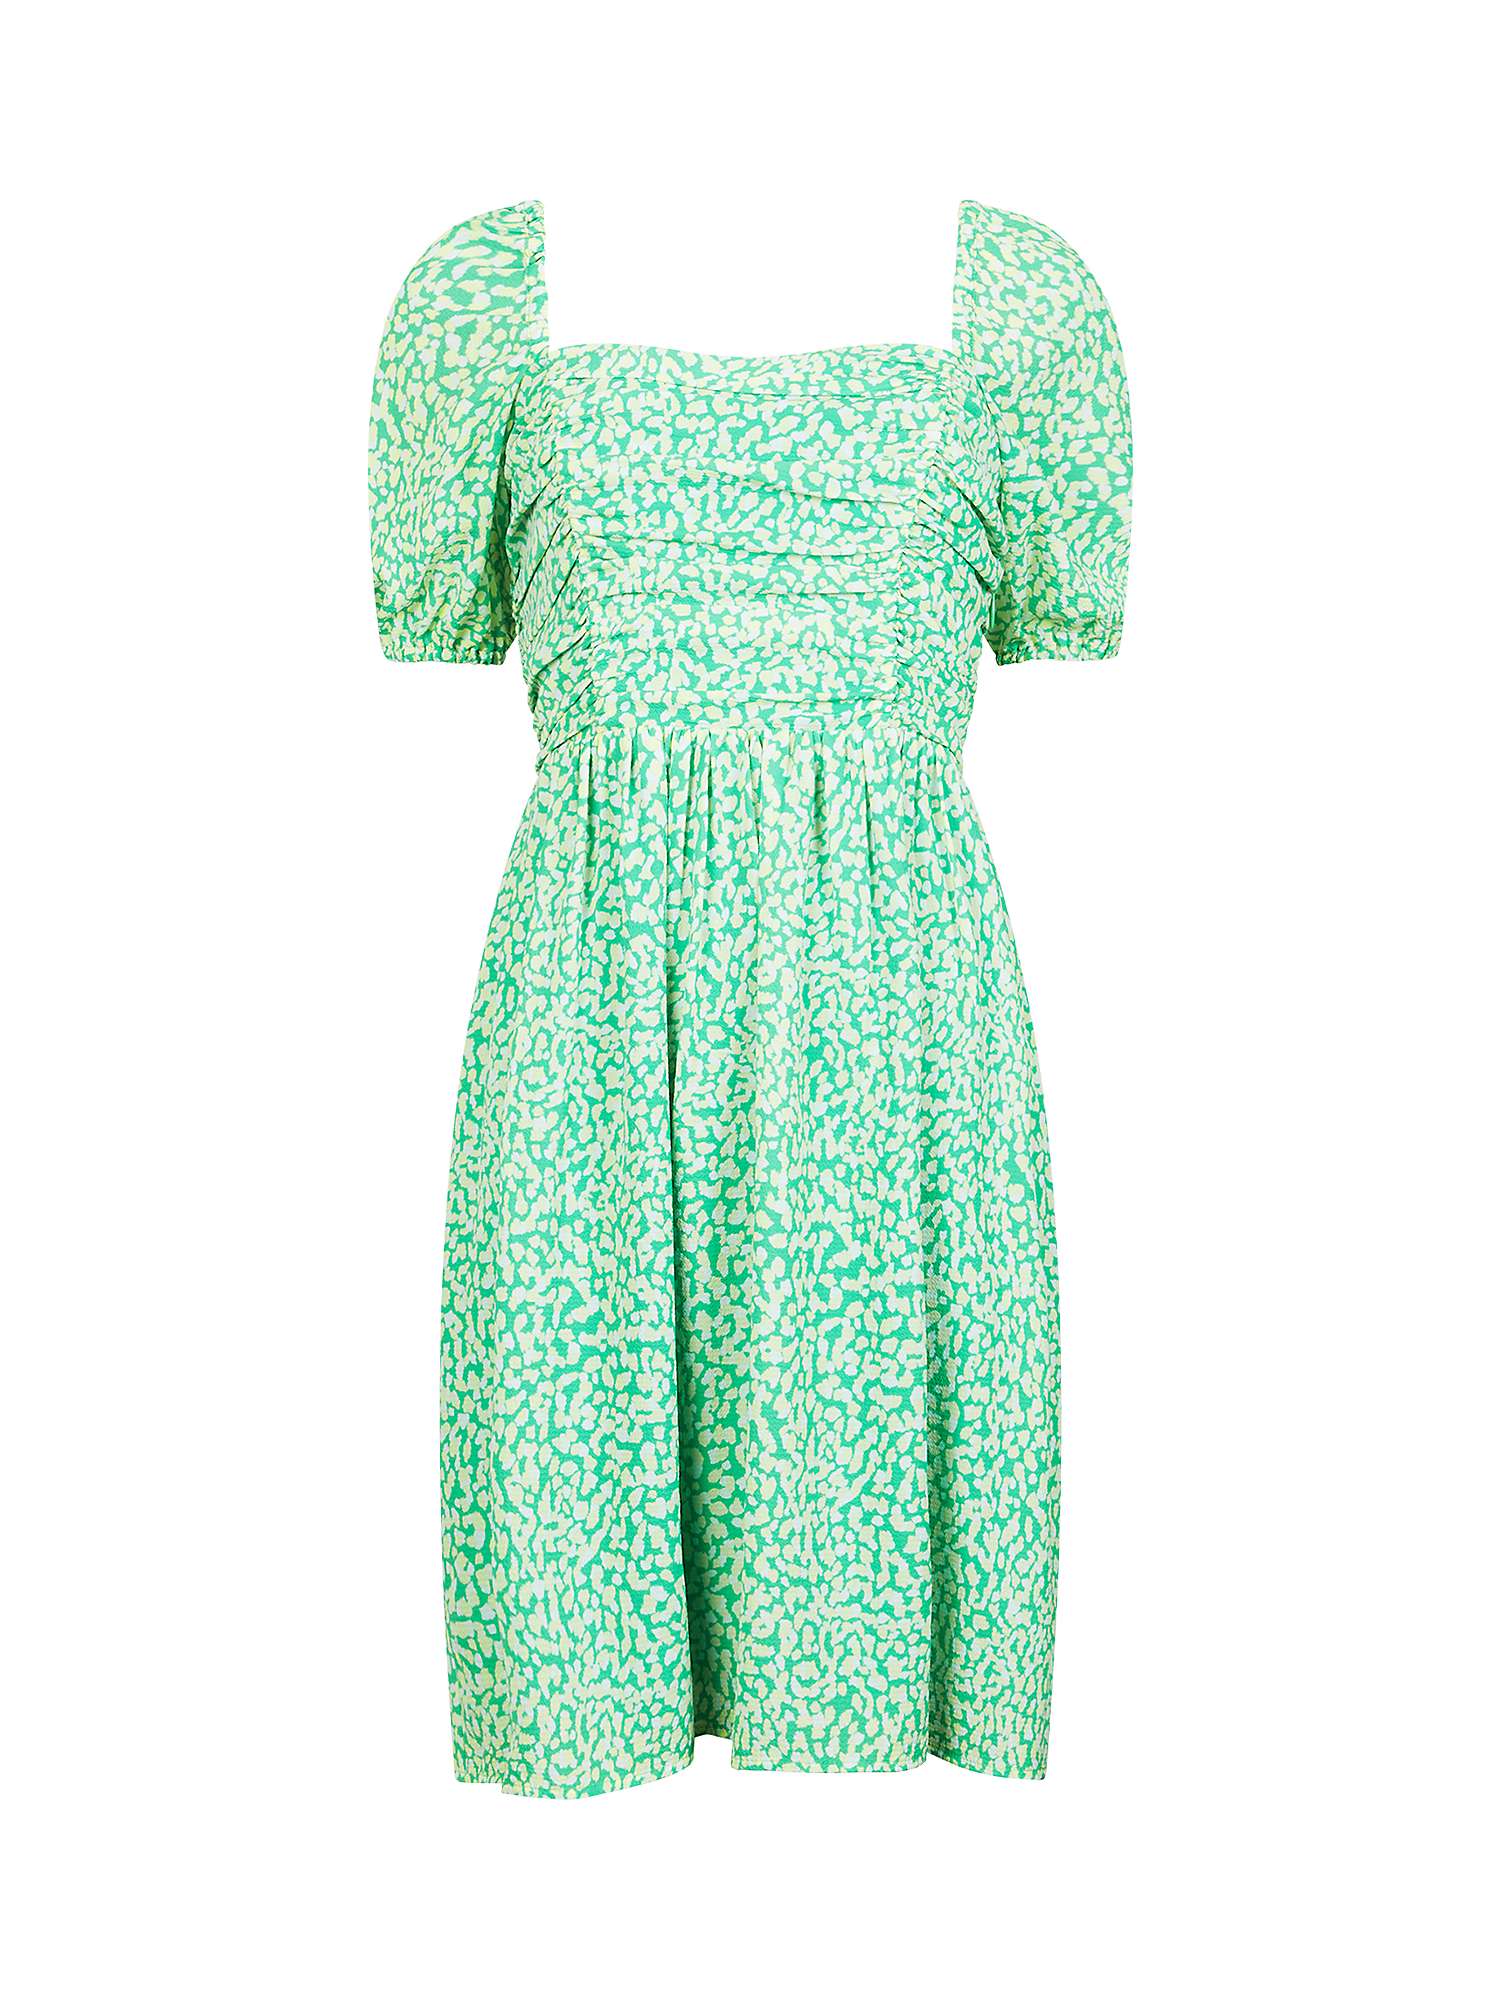 Buy French Connection Cadie Verona Mini Dress, Green Online at johnlewis.com